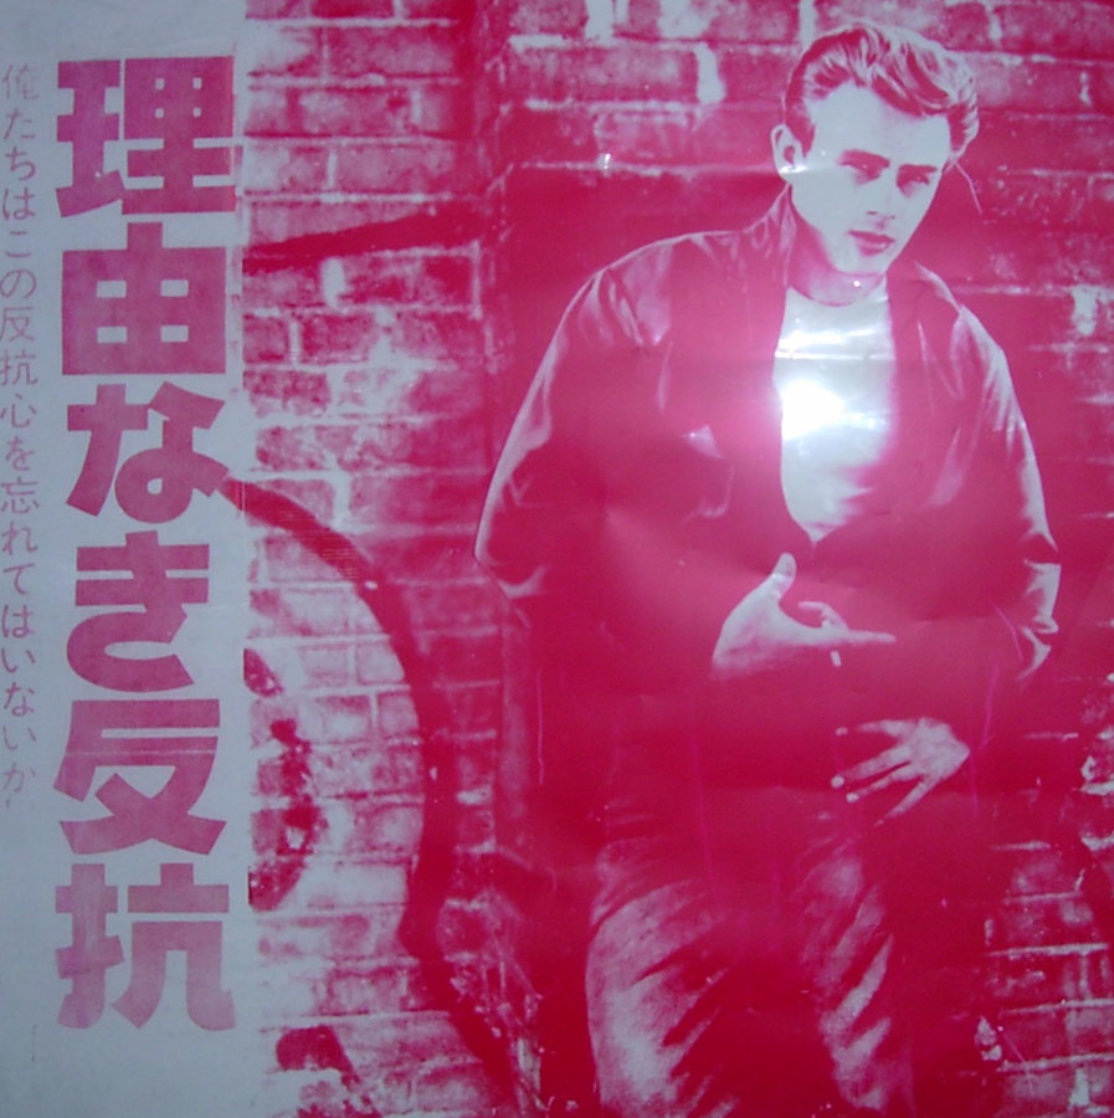 James Dean Rebel Without a Cause Printers -  Acetate 38x38 Original Painting by Andy Warhol